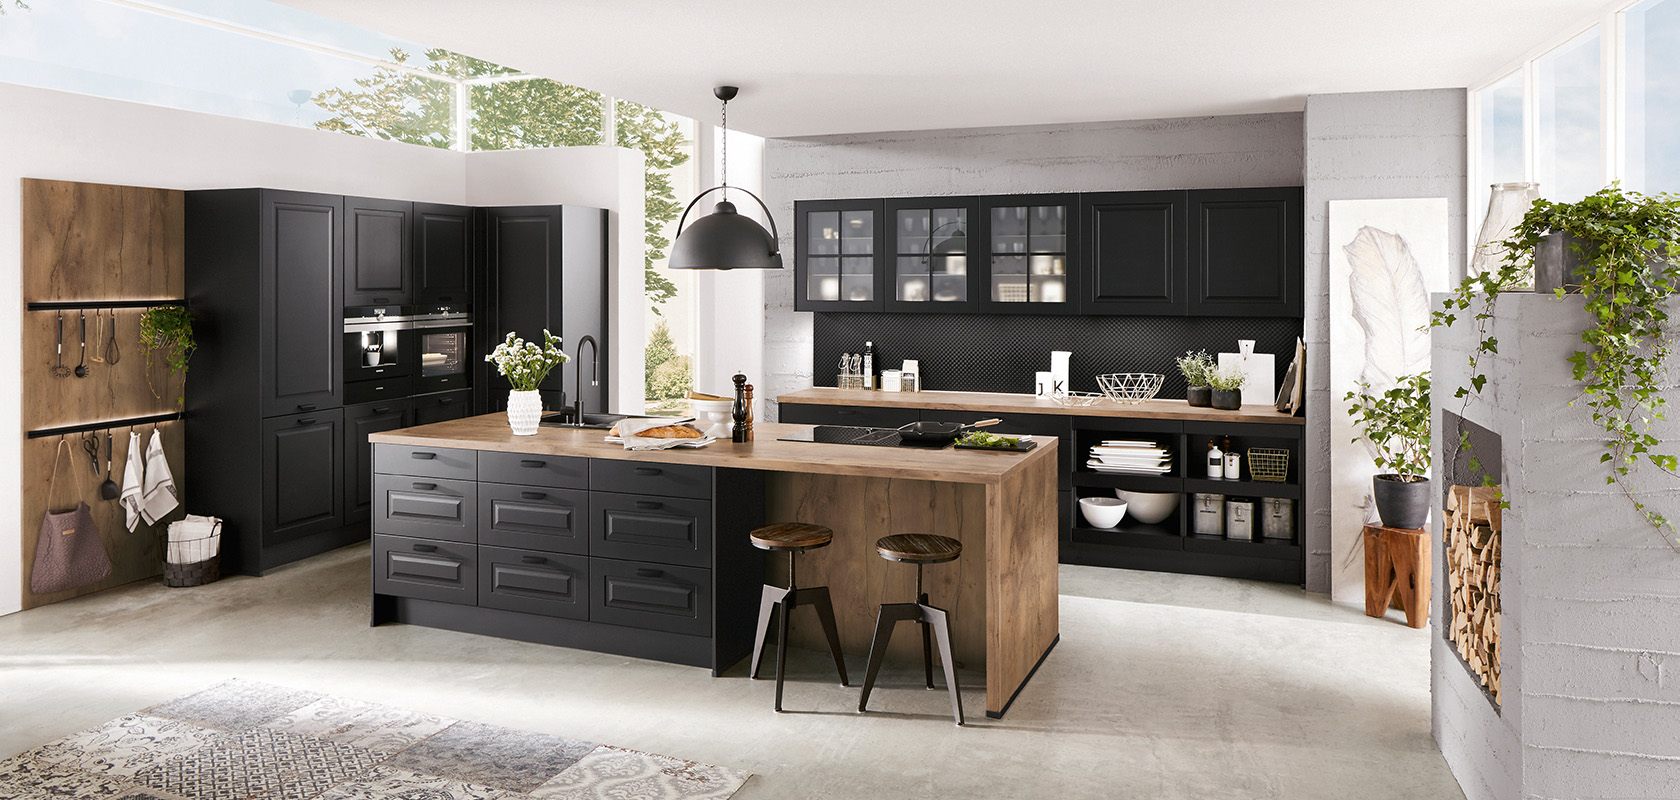 Modern kitchen interior showcasing sleek black cabinetry, wooden accents, and a central island, infused with natural light and greenery for a stylish, inviting space.